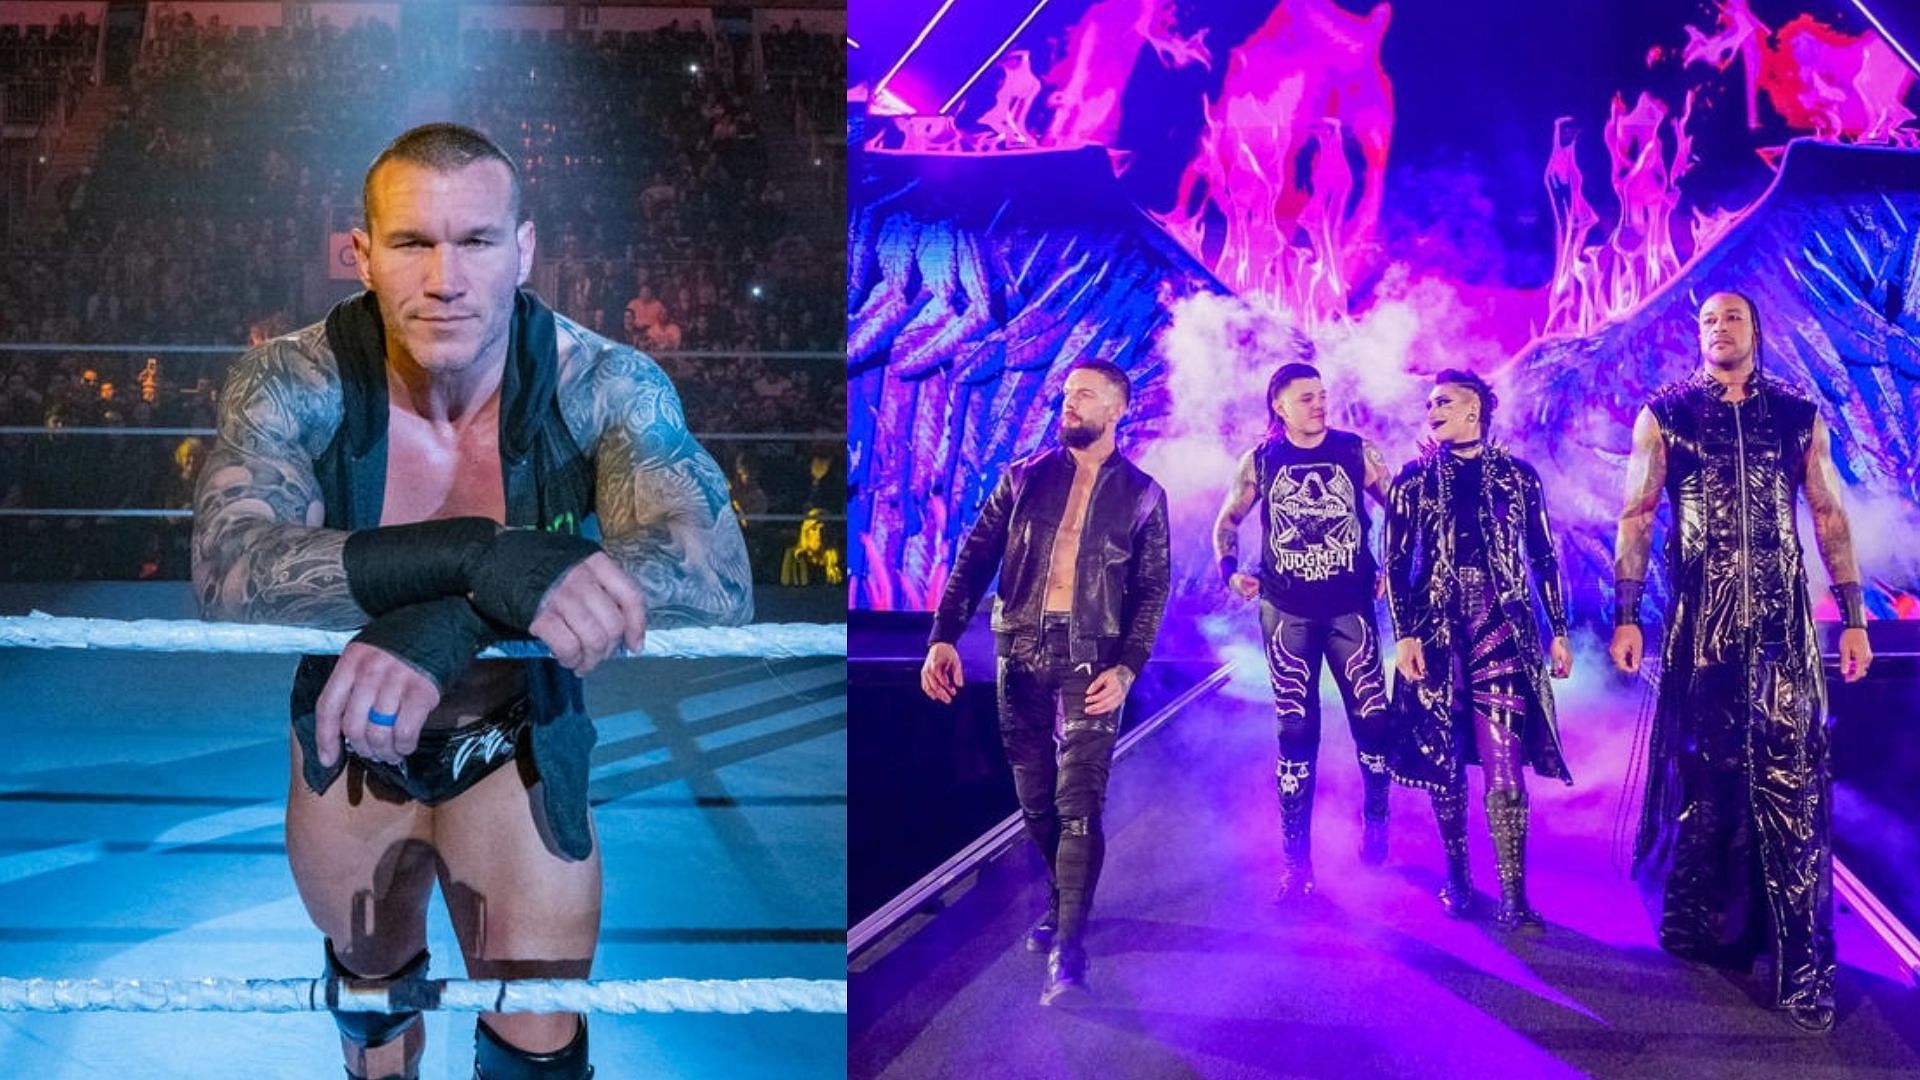 Randy Orton (Left) and The Judgment Day